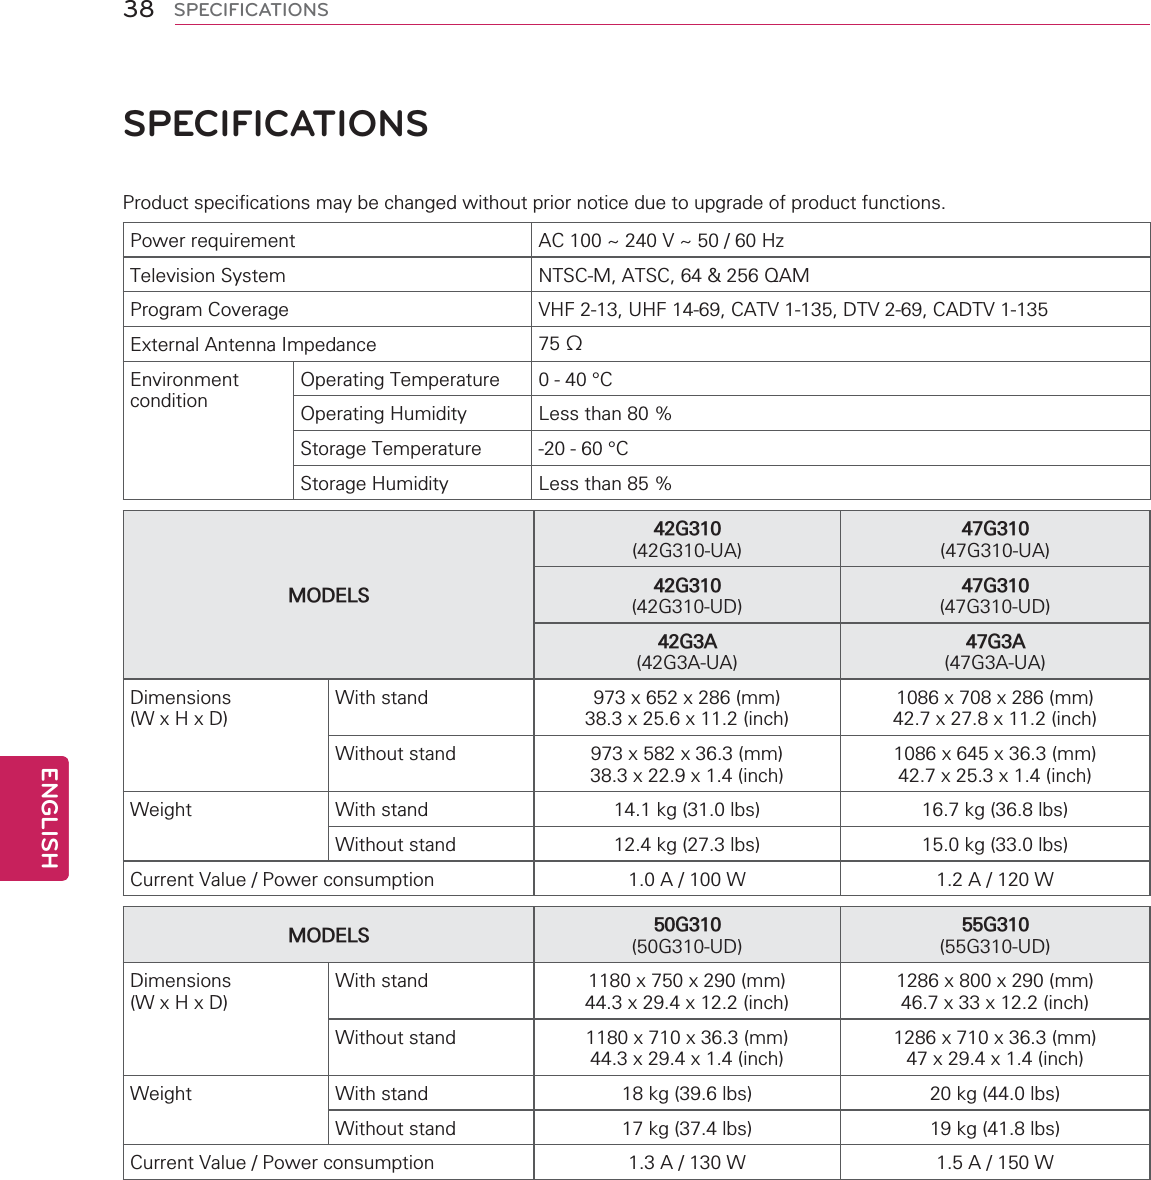 38ENGENGLISHSPECIFICATIONSSPECIFICATIONSProduct specifications may be changed without prior notice due to upgrade of product functions.Power requirement AC 100 ~ 240 V ~ 50 / 60 HzTelevision System NTSC-M, ATSC, 64 &amp; 256 QAMProgram Coverage VHF 2-13, UHF 14-69, CATV 1-135, DTV 2-69, CADTV 1-135External Antenna Impedance 75 ΩEnvironmentconditionOperating Temperature 0 - 40 °COperating Humidity Less than 80 %Storage Temperature -20 - 60 °CStorage Humidity Less than 85 %MODELS42G310 (42G310-UA)47G310 (47G310-UA)42G310 (42G310-UD)47G310 (47G310-UD)42G3A (42G3A-UA)47G3A (47G3A-UA)Dimensions(W x H x D)With stand 973 x 652 x 286 (mm)38.3 x 25.6 x 11.2 (inch)1086 x 708 x 286 (mm)42.7 x 27.8 x 11.2 (inch)Without stand 973 x 582 x 36.3 (mm)38.3 x 22.9 x 1.4 (inch)1086 x 645 x 36.3 (mm)42.7 x 25.3 x 1.4 (inch)Weight With stand 14.1 kg (31.0 lbs) 16.7 kg (36.8 lbs)Without stand 12.4 kg (27.3 lbs) 15.0 kg (33.0 lbs)Current Value / Power consumption 1.0 A / 100 W 1.2 A / 120 WMODELS 50G310 (50G310-UD)55G310 (55G310-UD)Dimensions(W x H x D)With stand 1180 x 750 x 290 (mm)44.3 x 29.4 x 12.2 (inch)1286 x 800 x 290 (mm)46.7 x 33 x 12.2 (inch)Without stand 1180 x 710 x 36.3 (mm)44.3 x 29.4 x 1.4 (inch)1286 x 710 x 36.3 (mm)47 x 29.4 x 1.4 (inch)Weight With stand 18 kg (39.6 lbs) 20 kg (44.0 lbs)Without stand 17 kg (37.4 lbs) 19 kg (41.8 lbs)Current Value / Power consumption 1.3 A / 130 W 1.5 A / 150 W